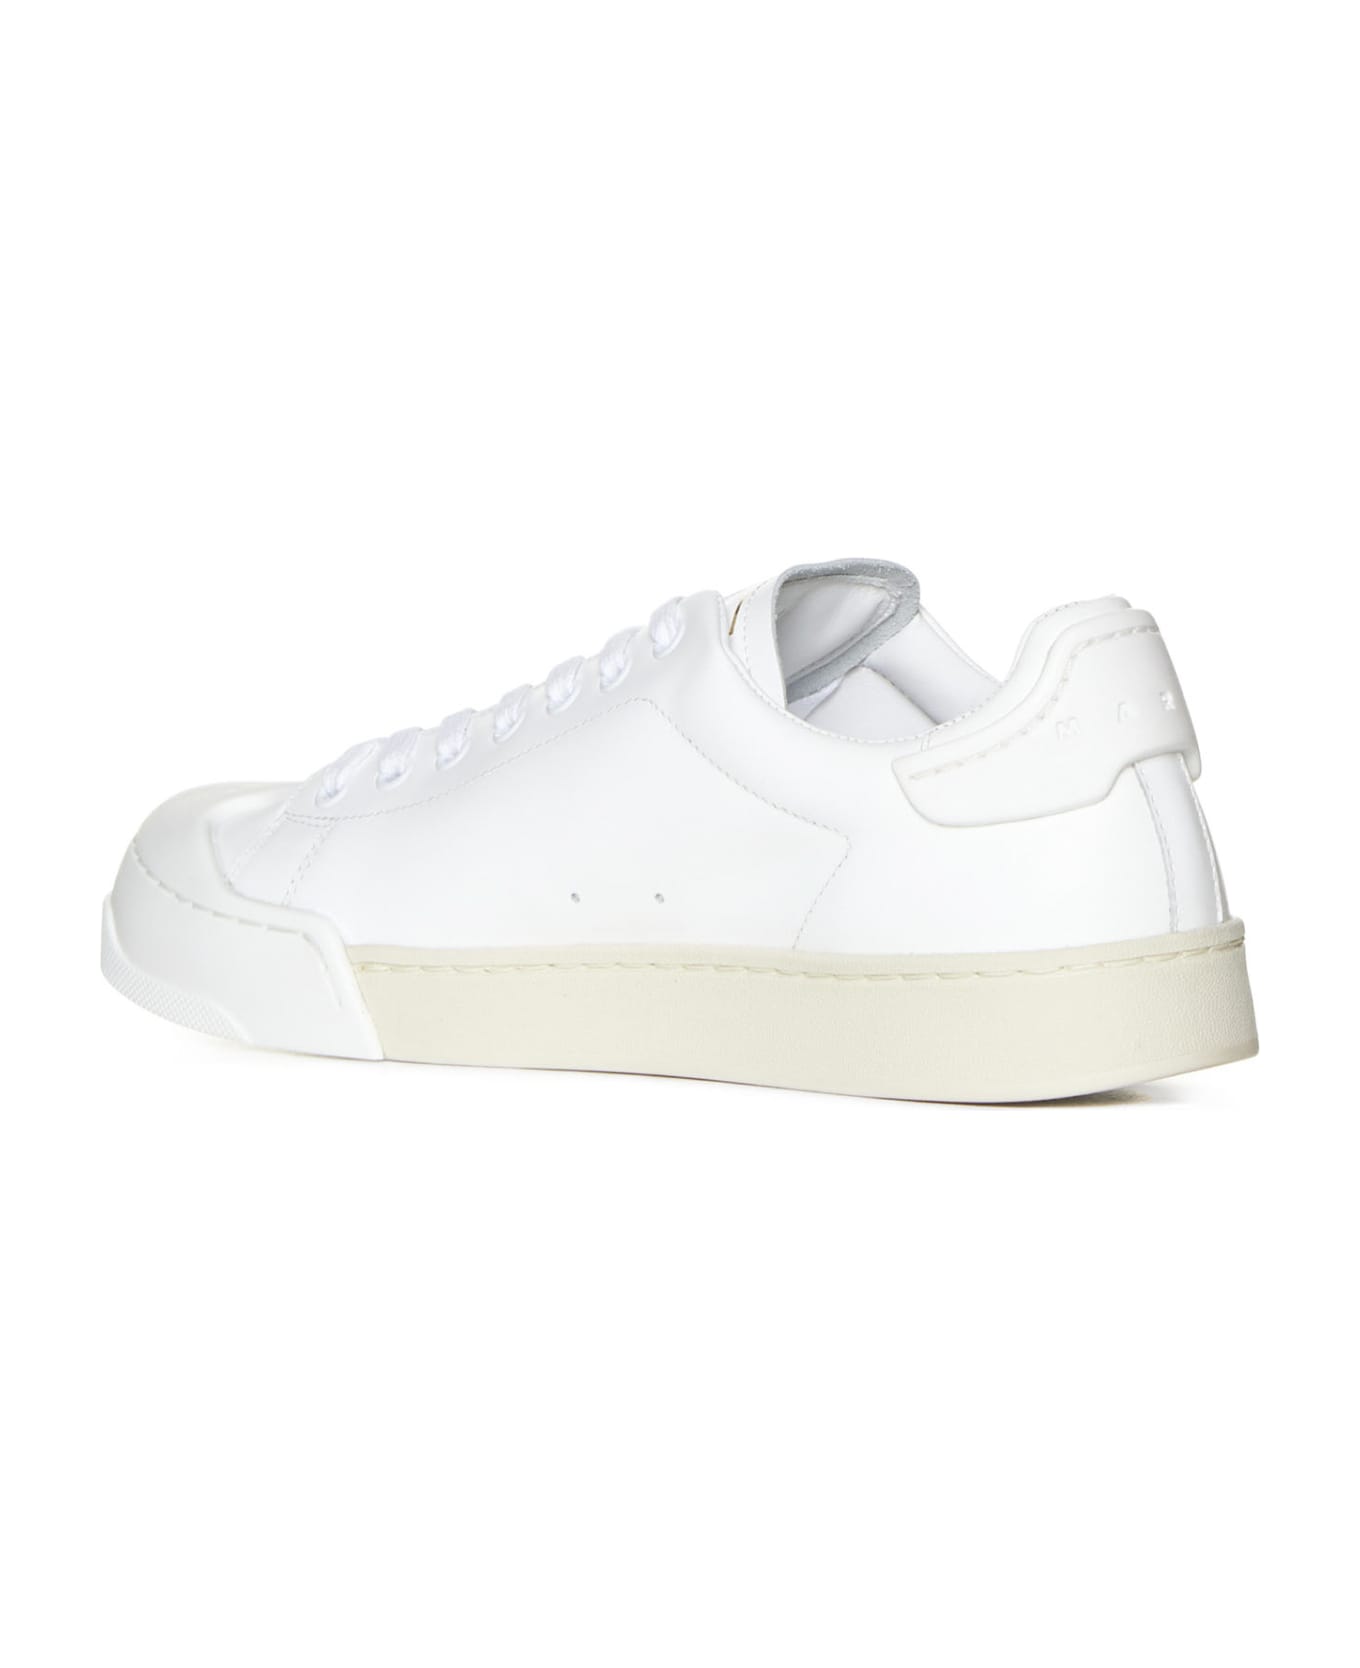 Marni Sneakers - Lily white/lily white